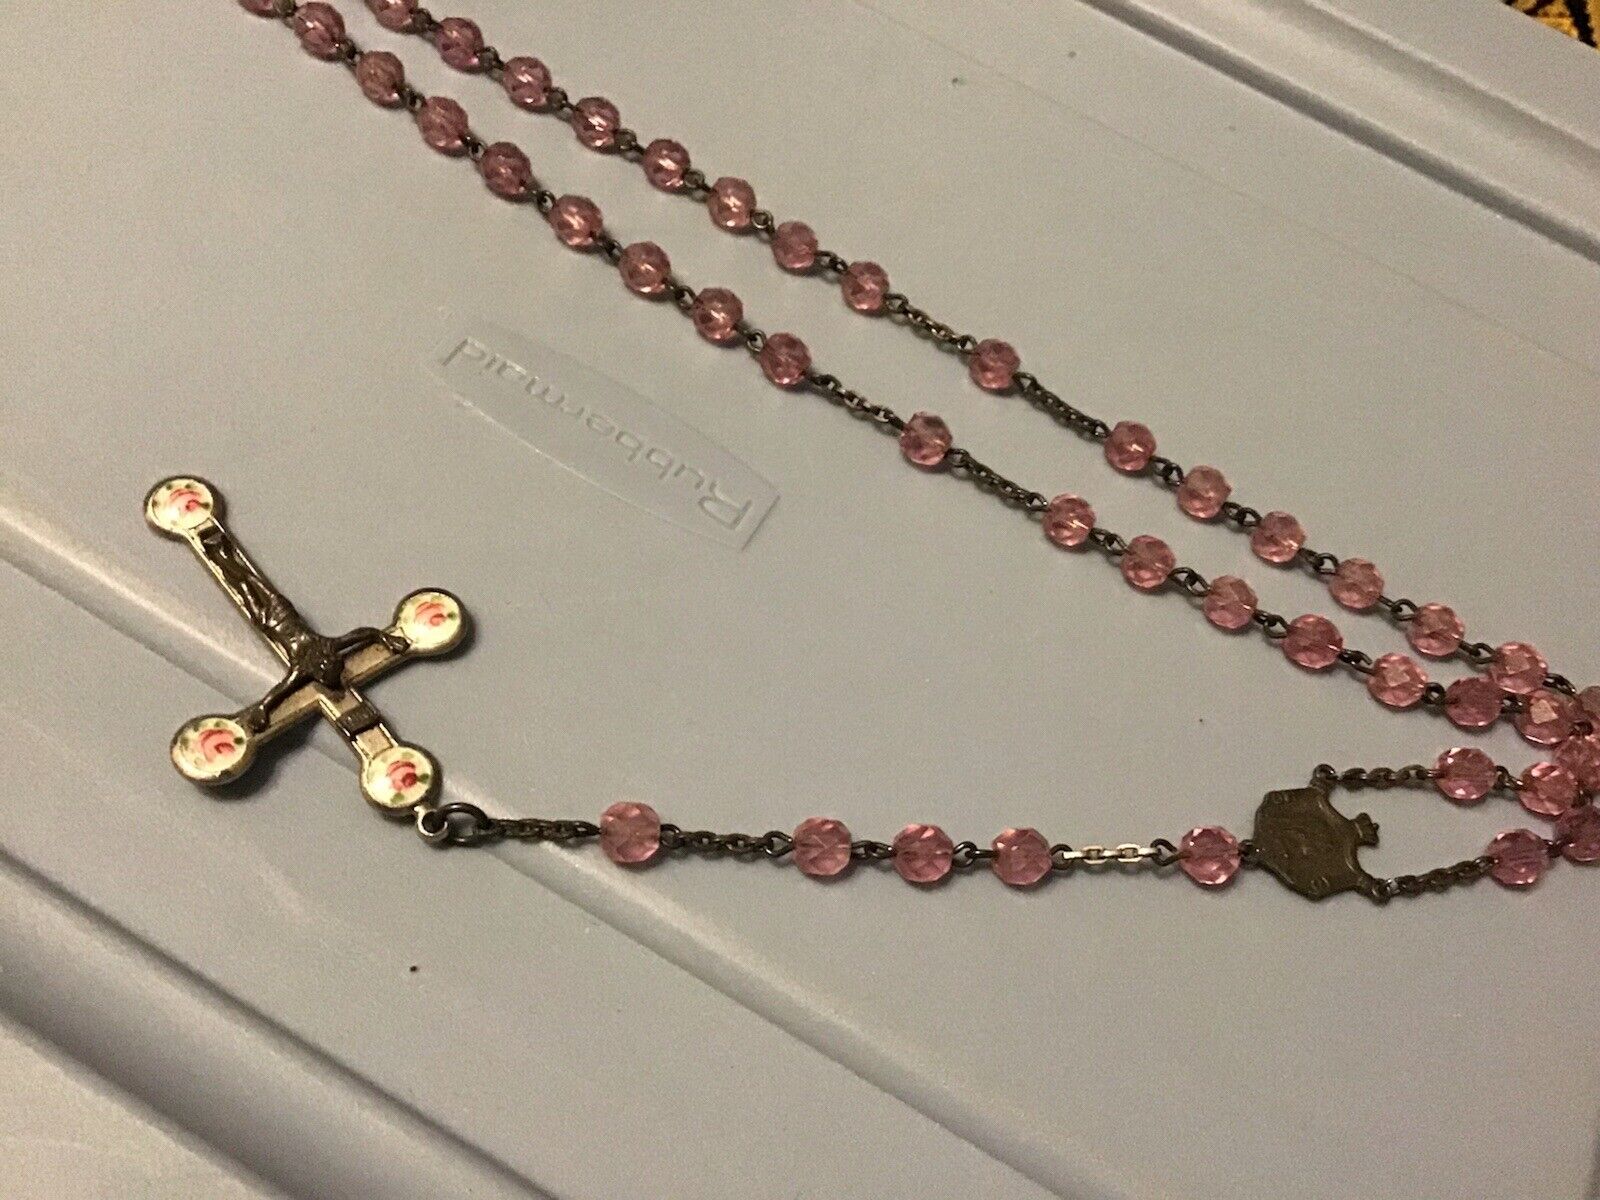 Anitique Rare Enamel Guilloche Sterling Silver Bead Rosary